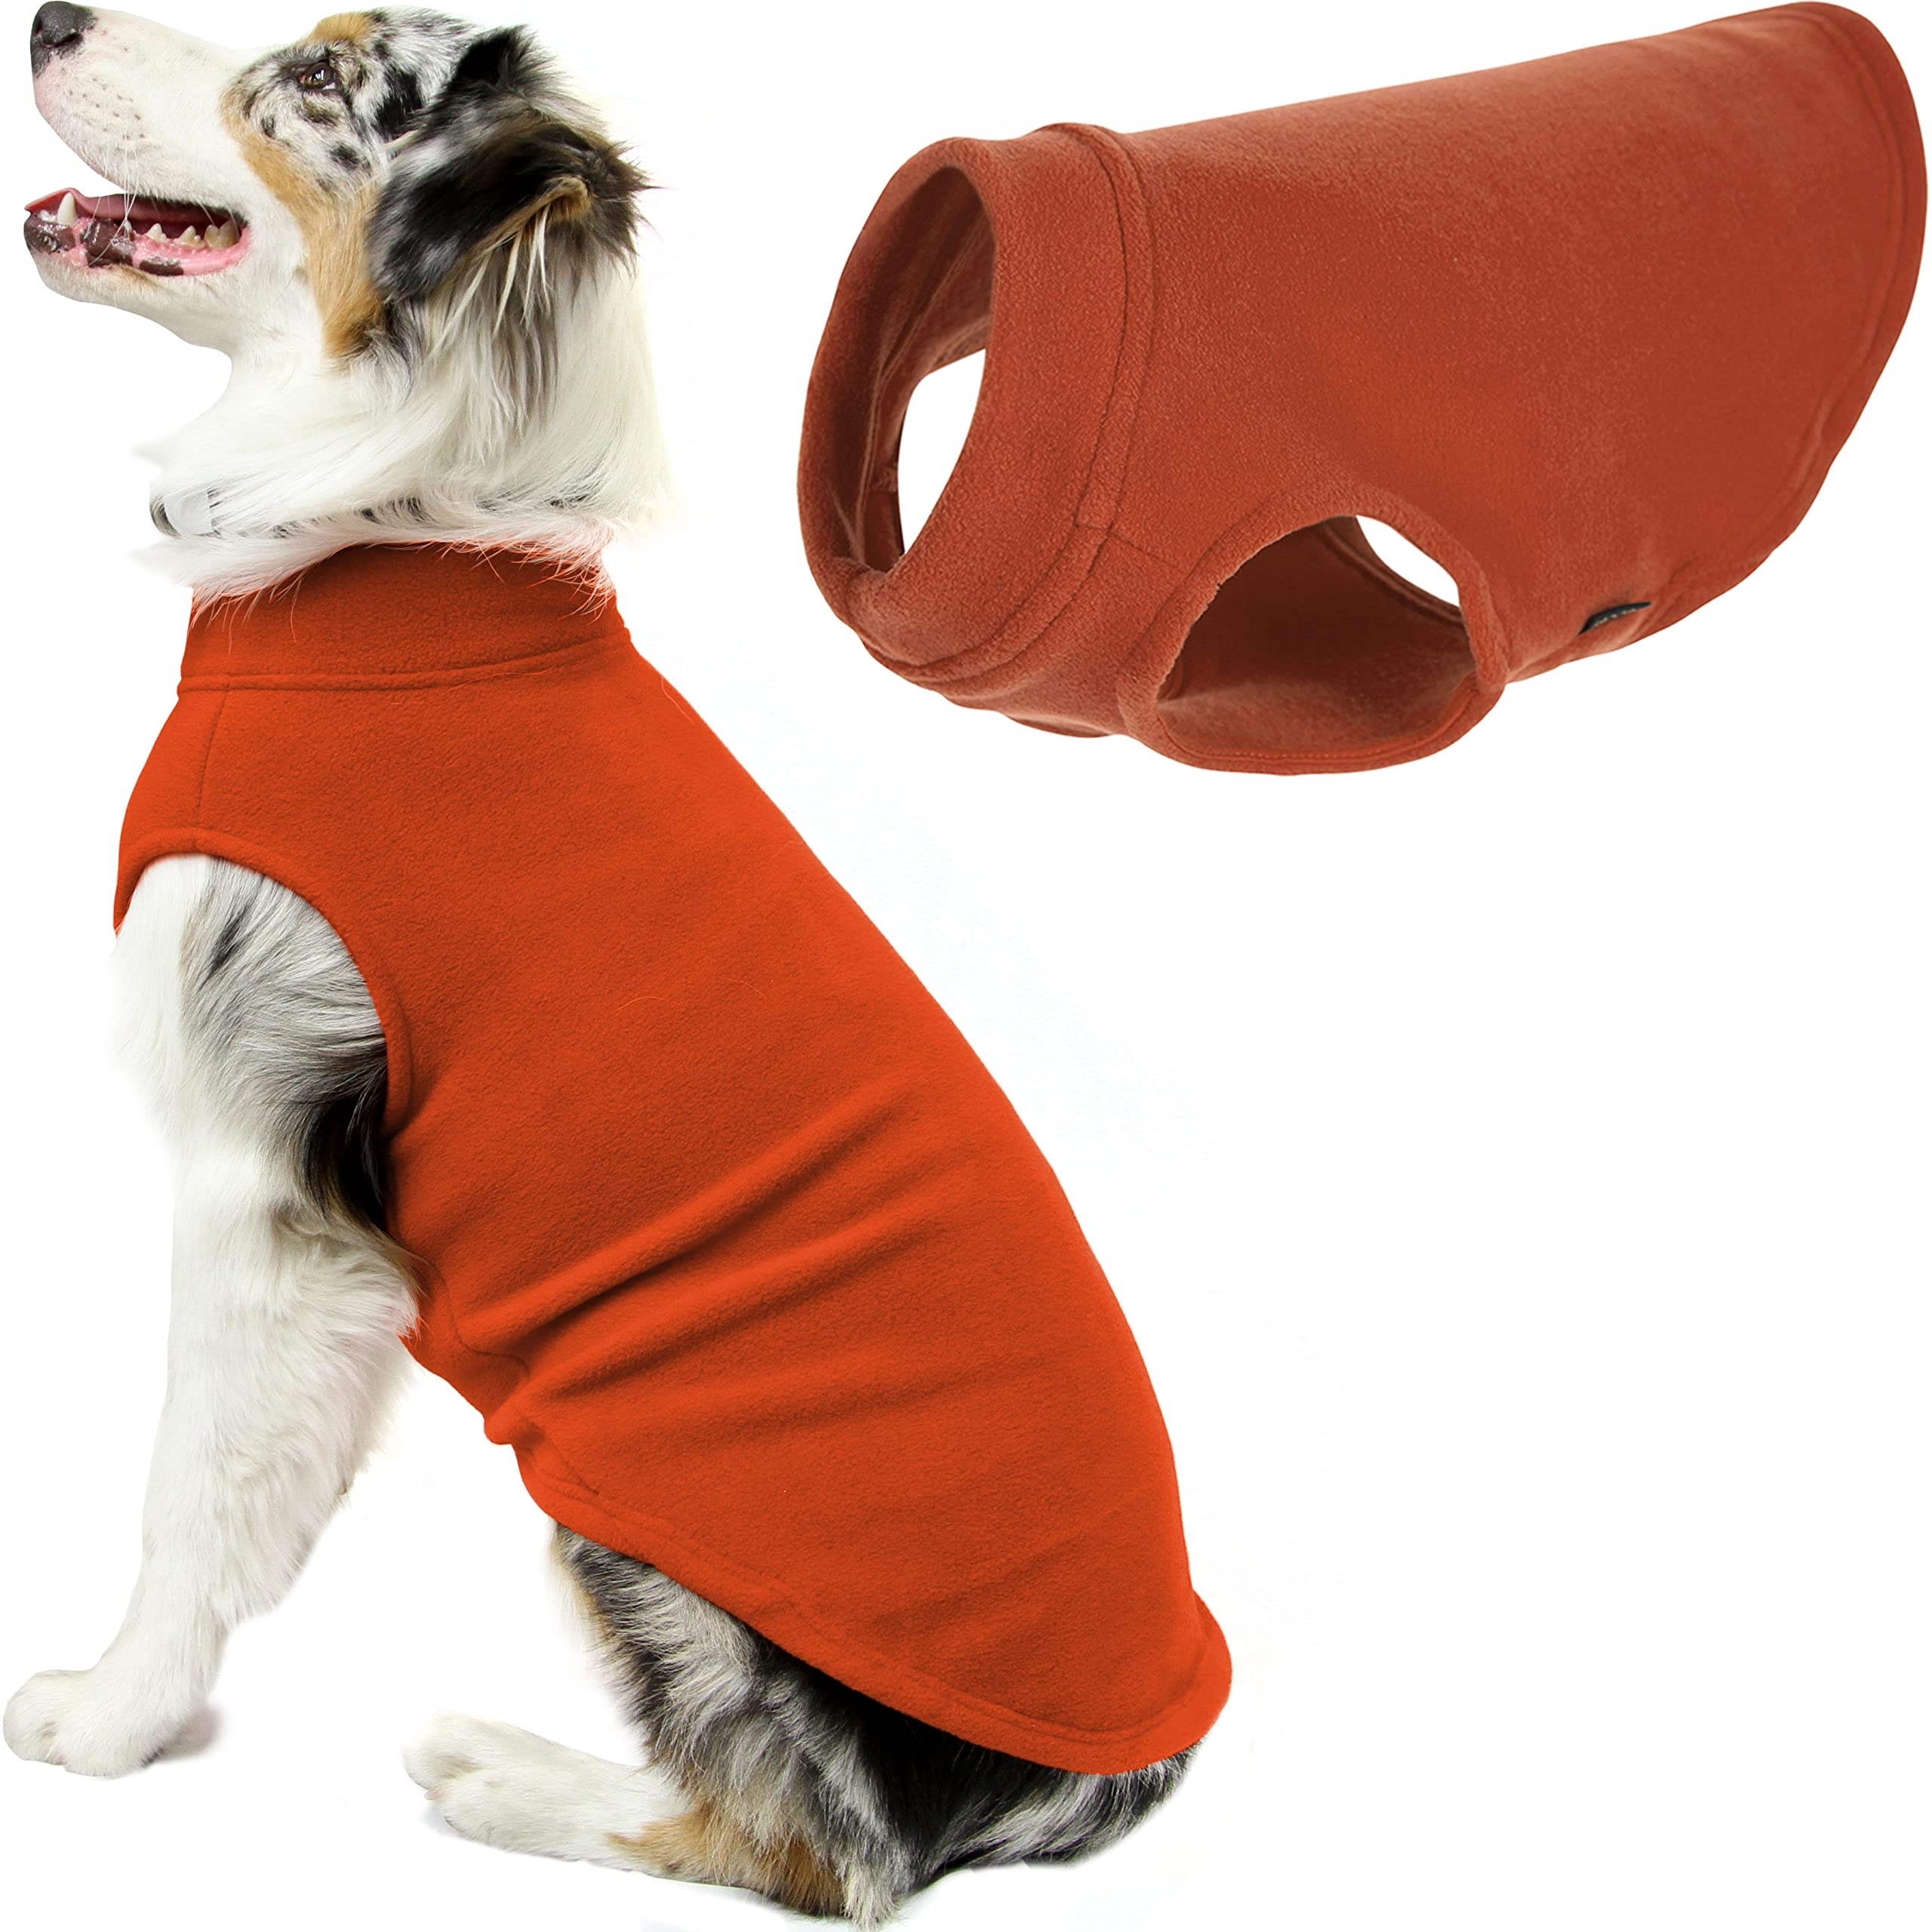 gooby Stretch Fleece Vest Dog Sweater - Pumpkin, 3X-Large - Warm Pullover Fleece Dog Jacket - Winter Dog clothes for Small Dogs 